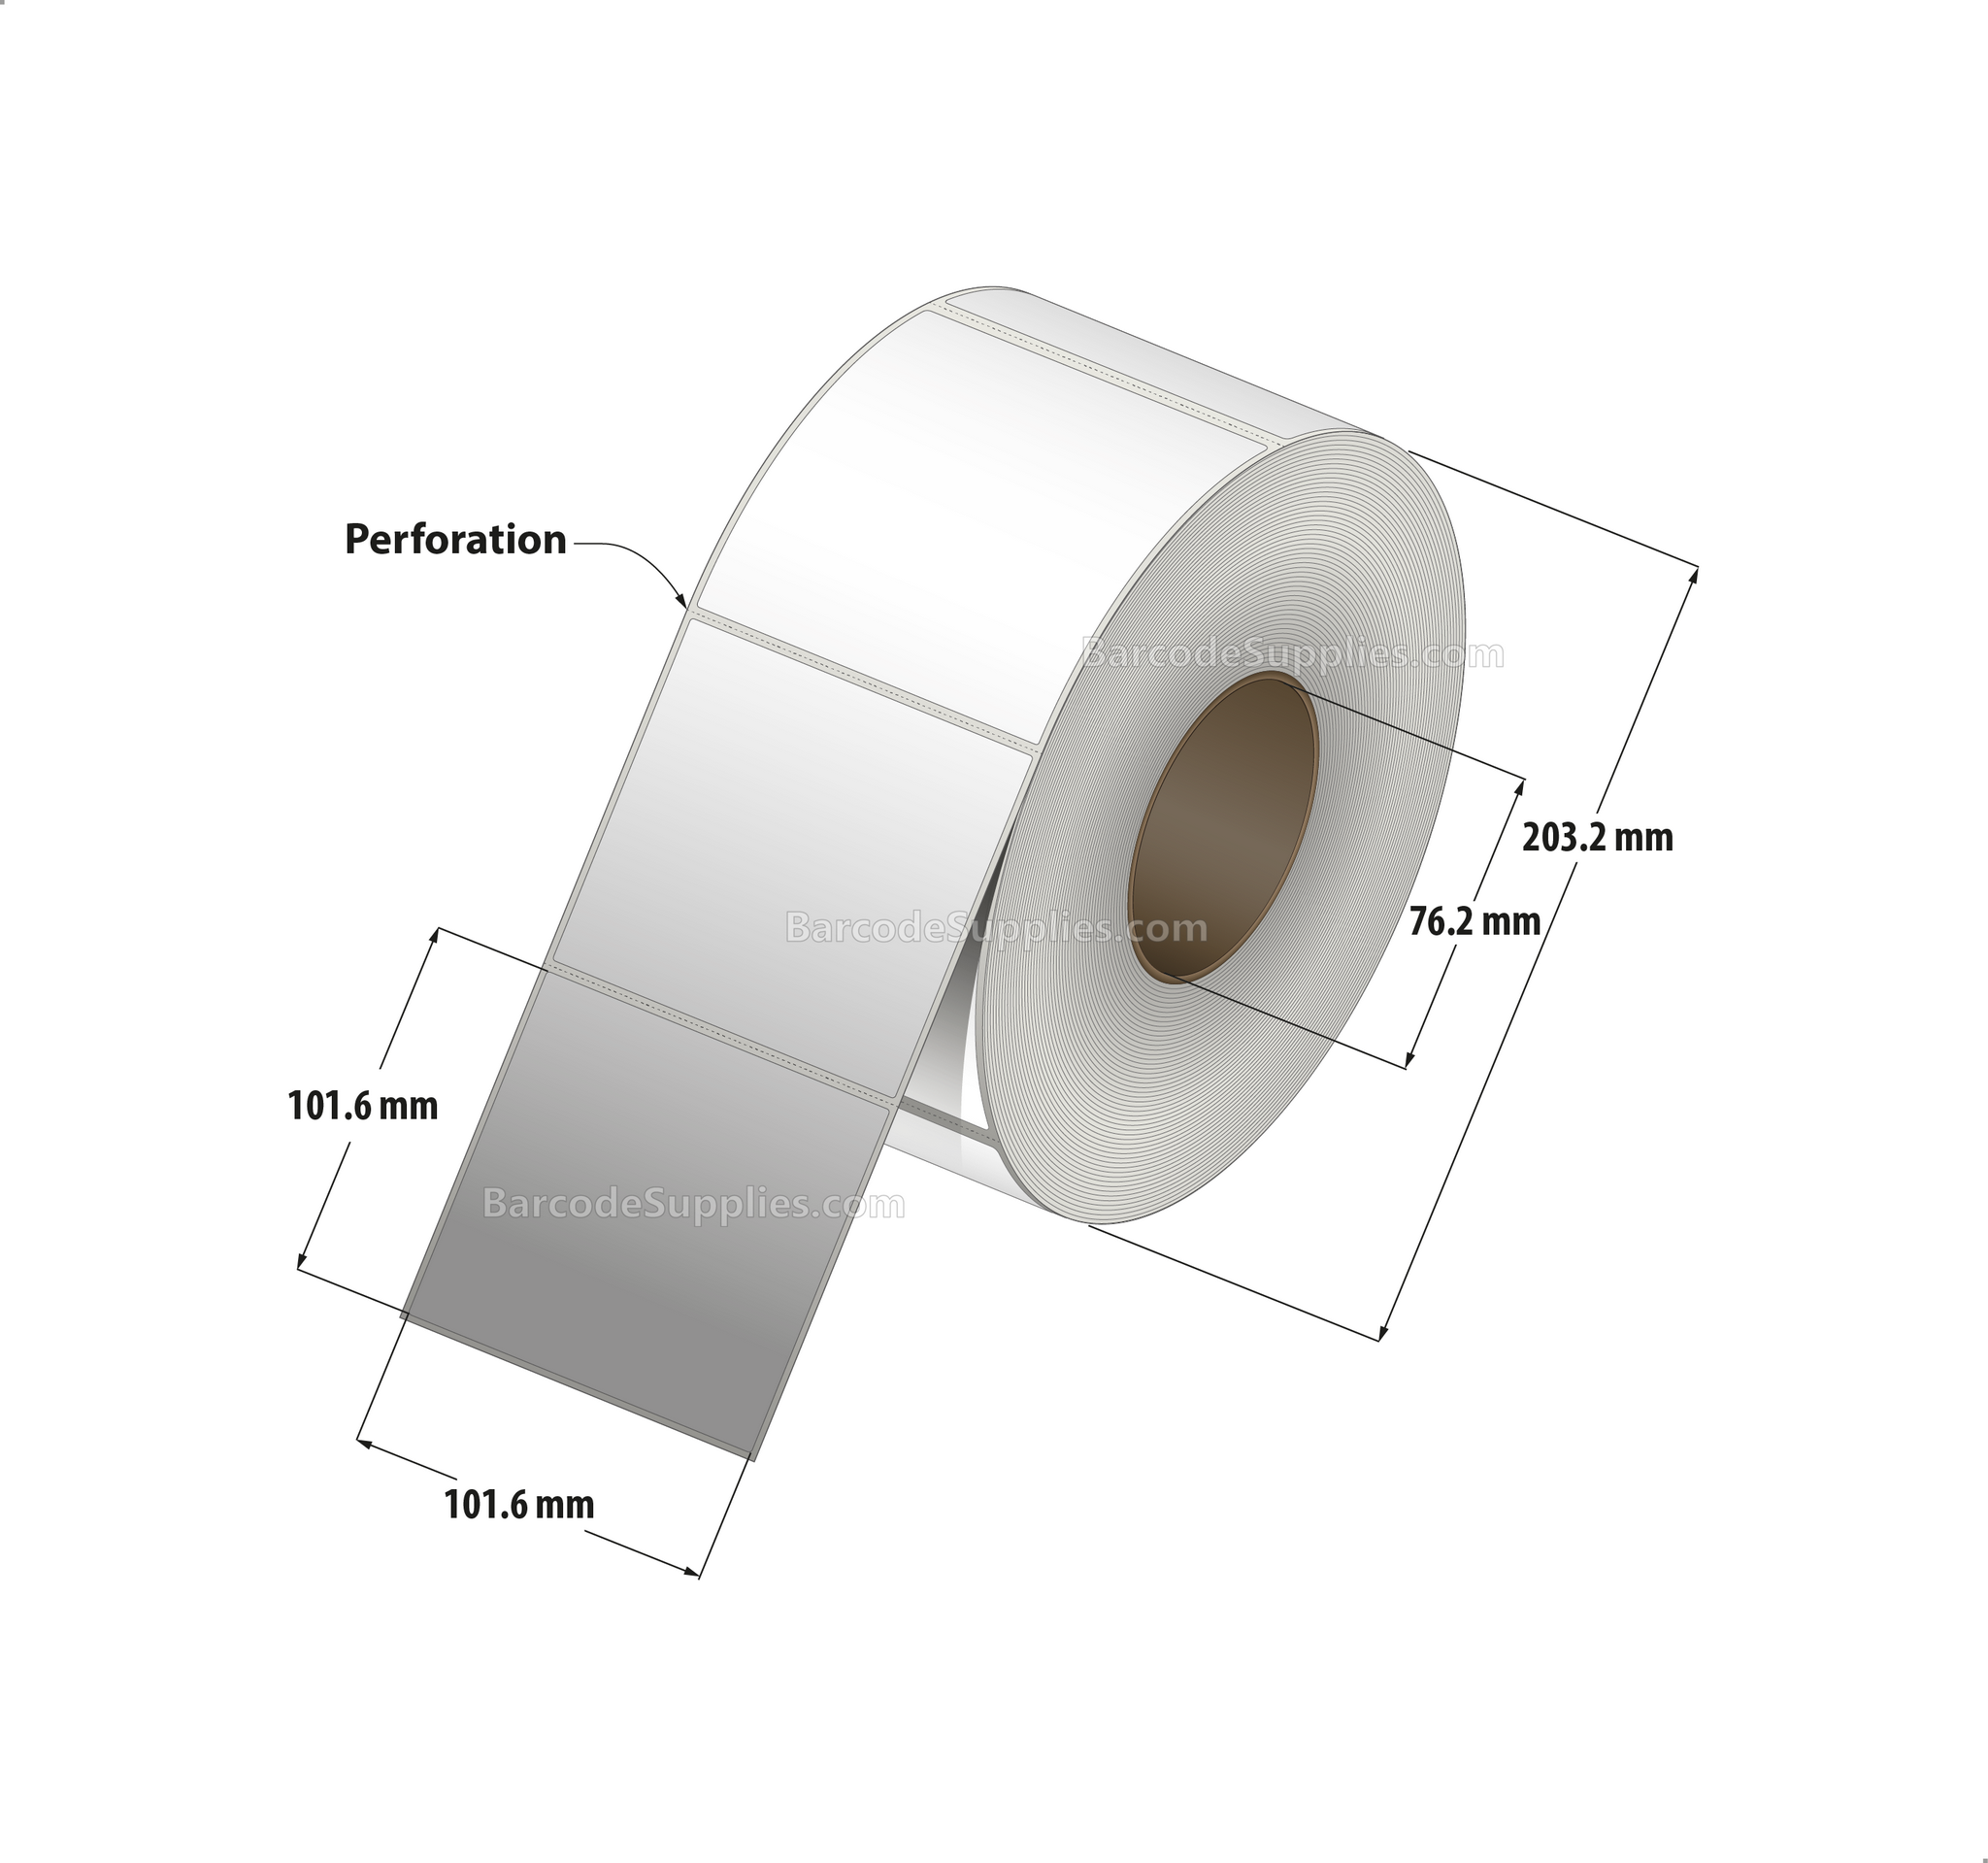 4 x 4 Direct Thermal White Labels With Rubber Adhesive - No Perforation - 1500 Labels Per Roll - Carton Of 4 Rolls - 6000 Labels Total - MPN: DT400400-3